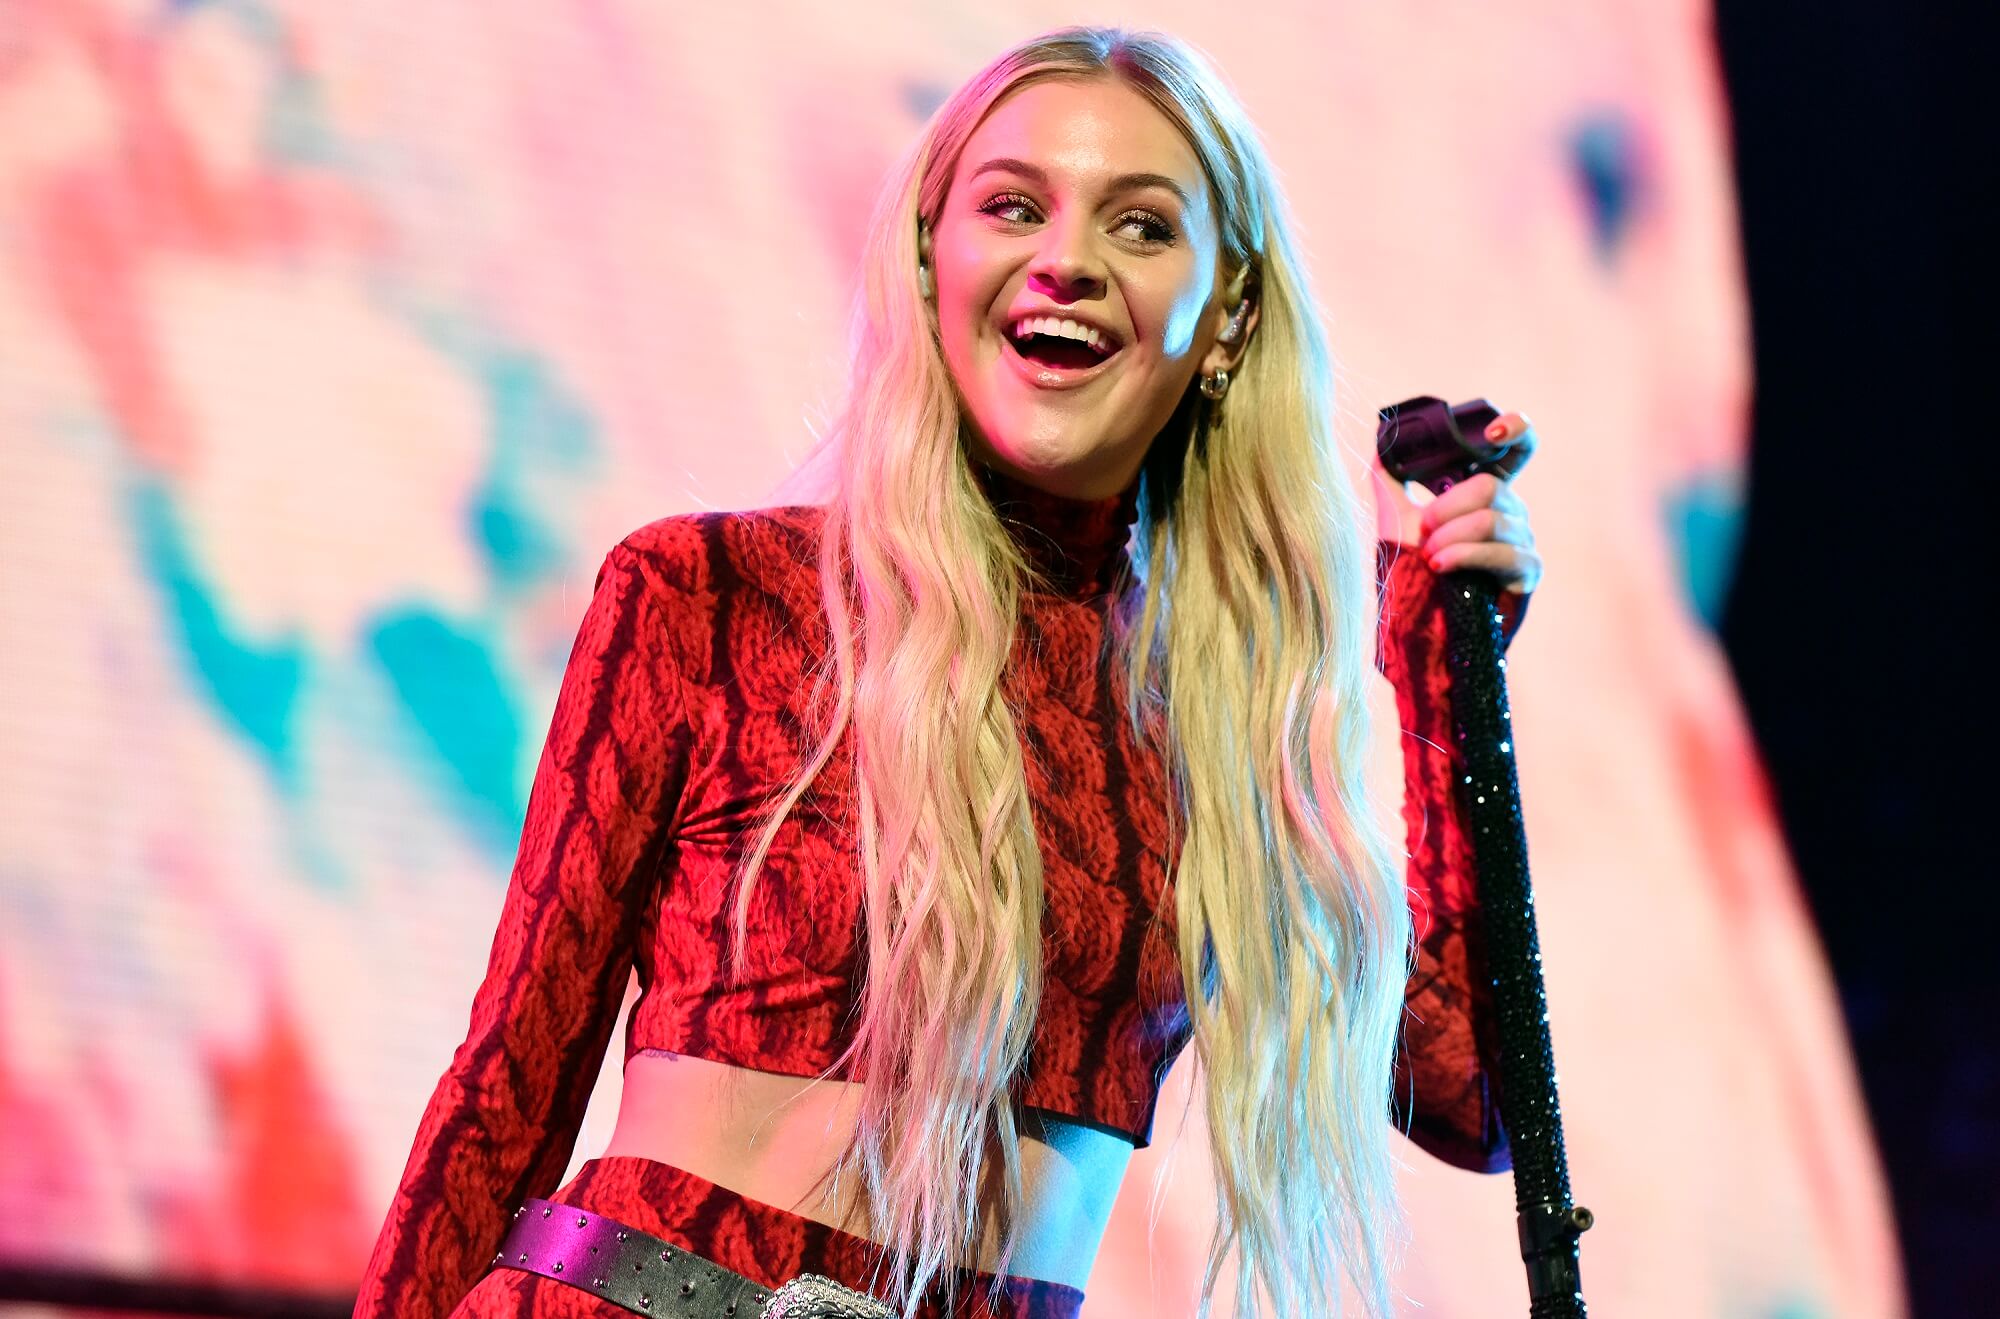 Kelsea Ballerini smiles onstage while holding a mic stand